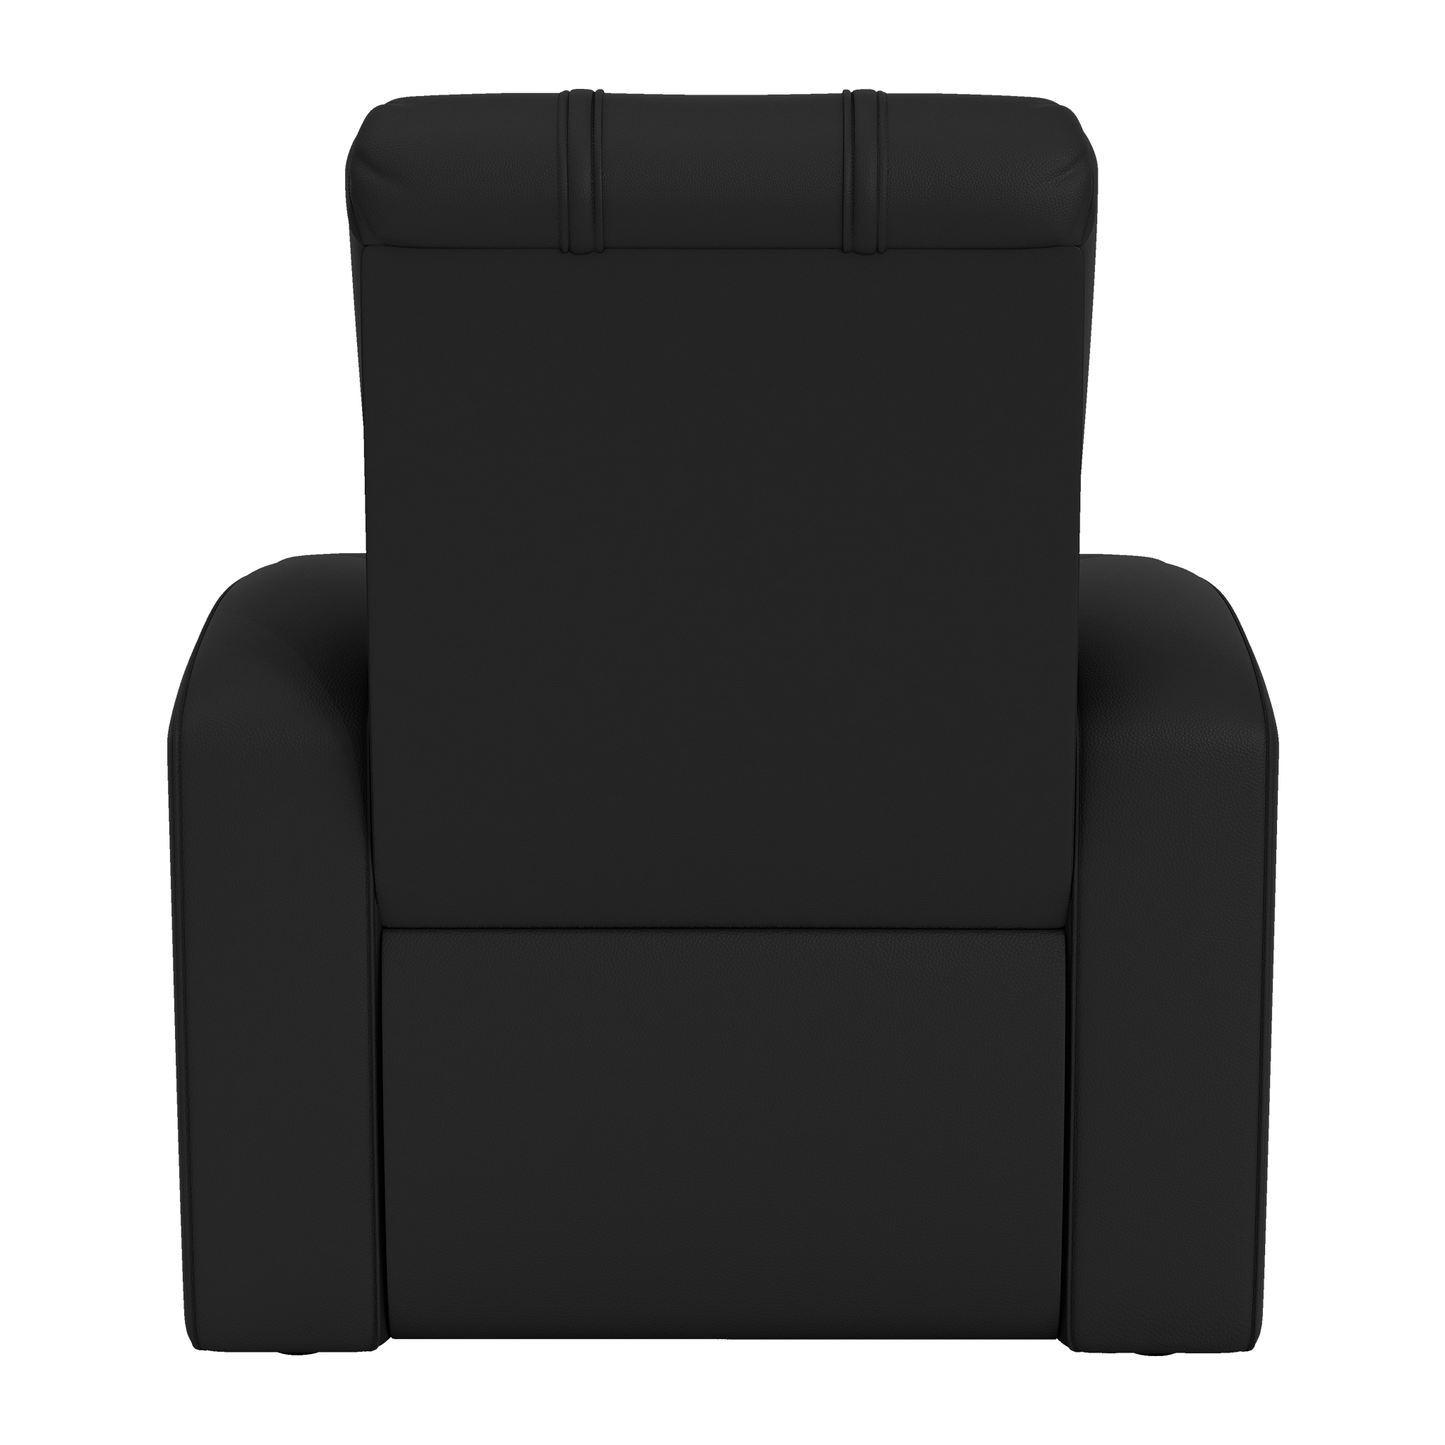 Relax Home Theater Recliner with Toronto Blue Jays Logo